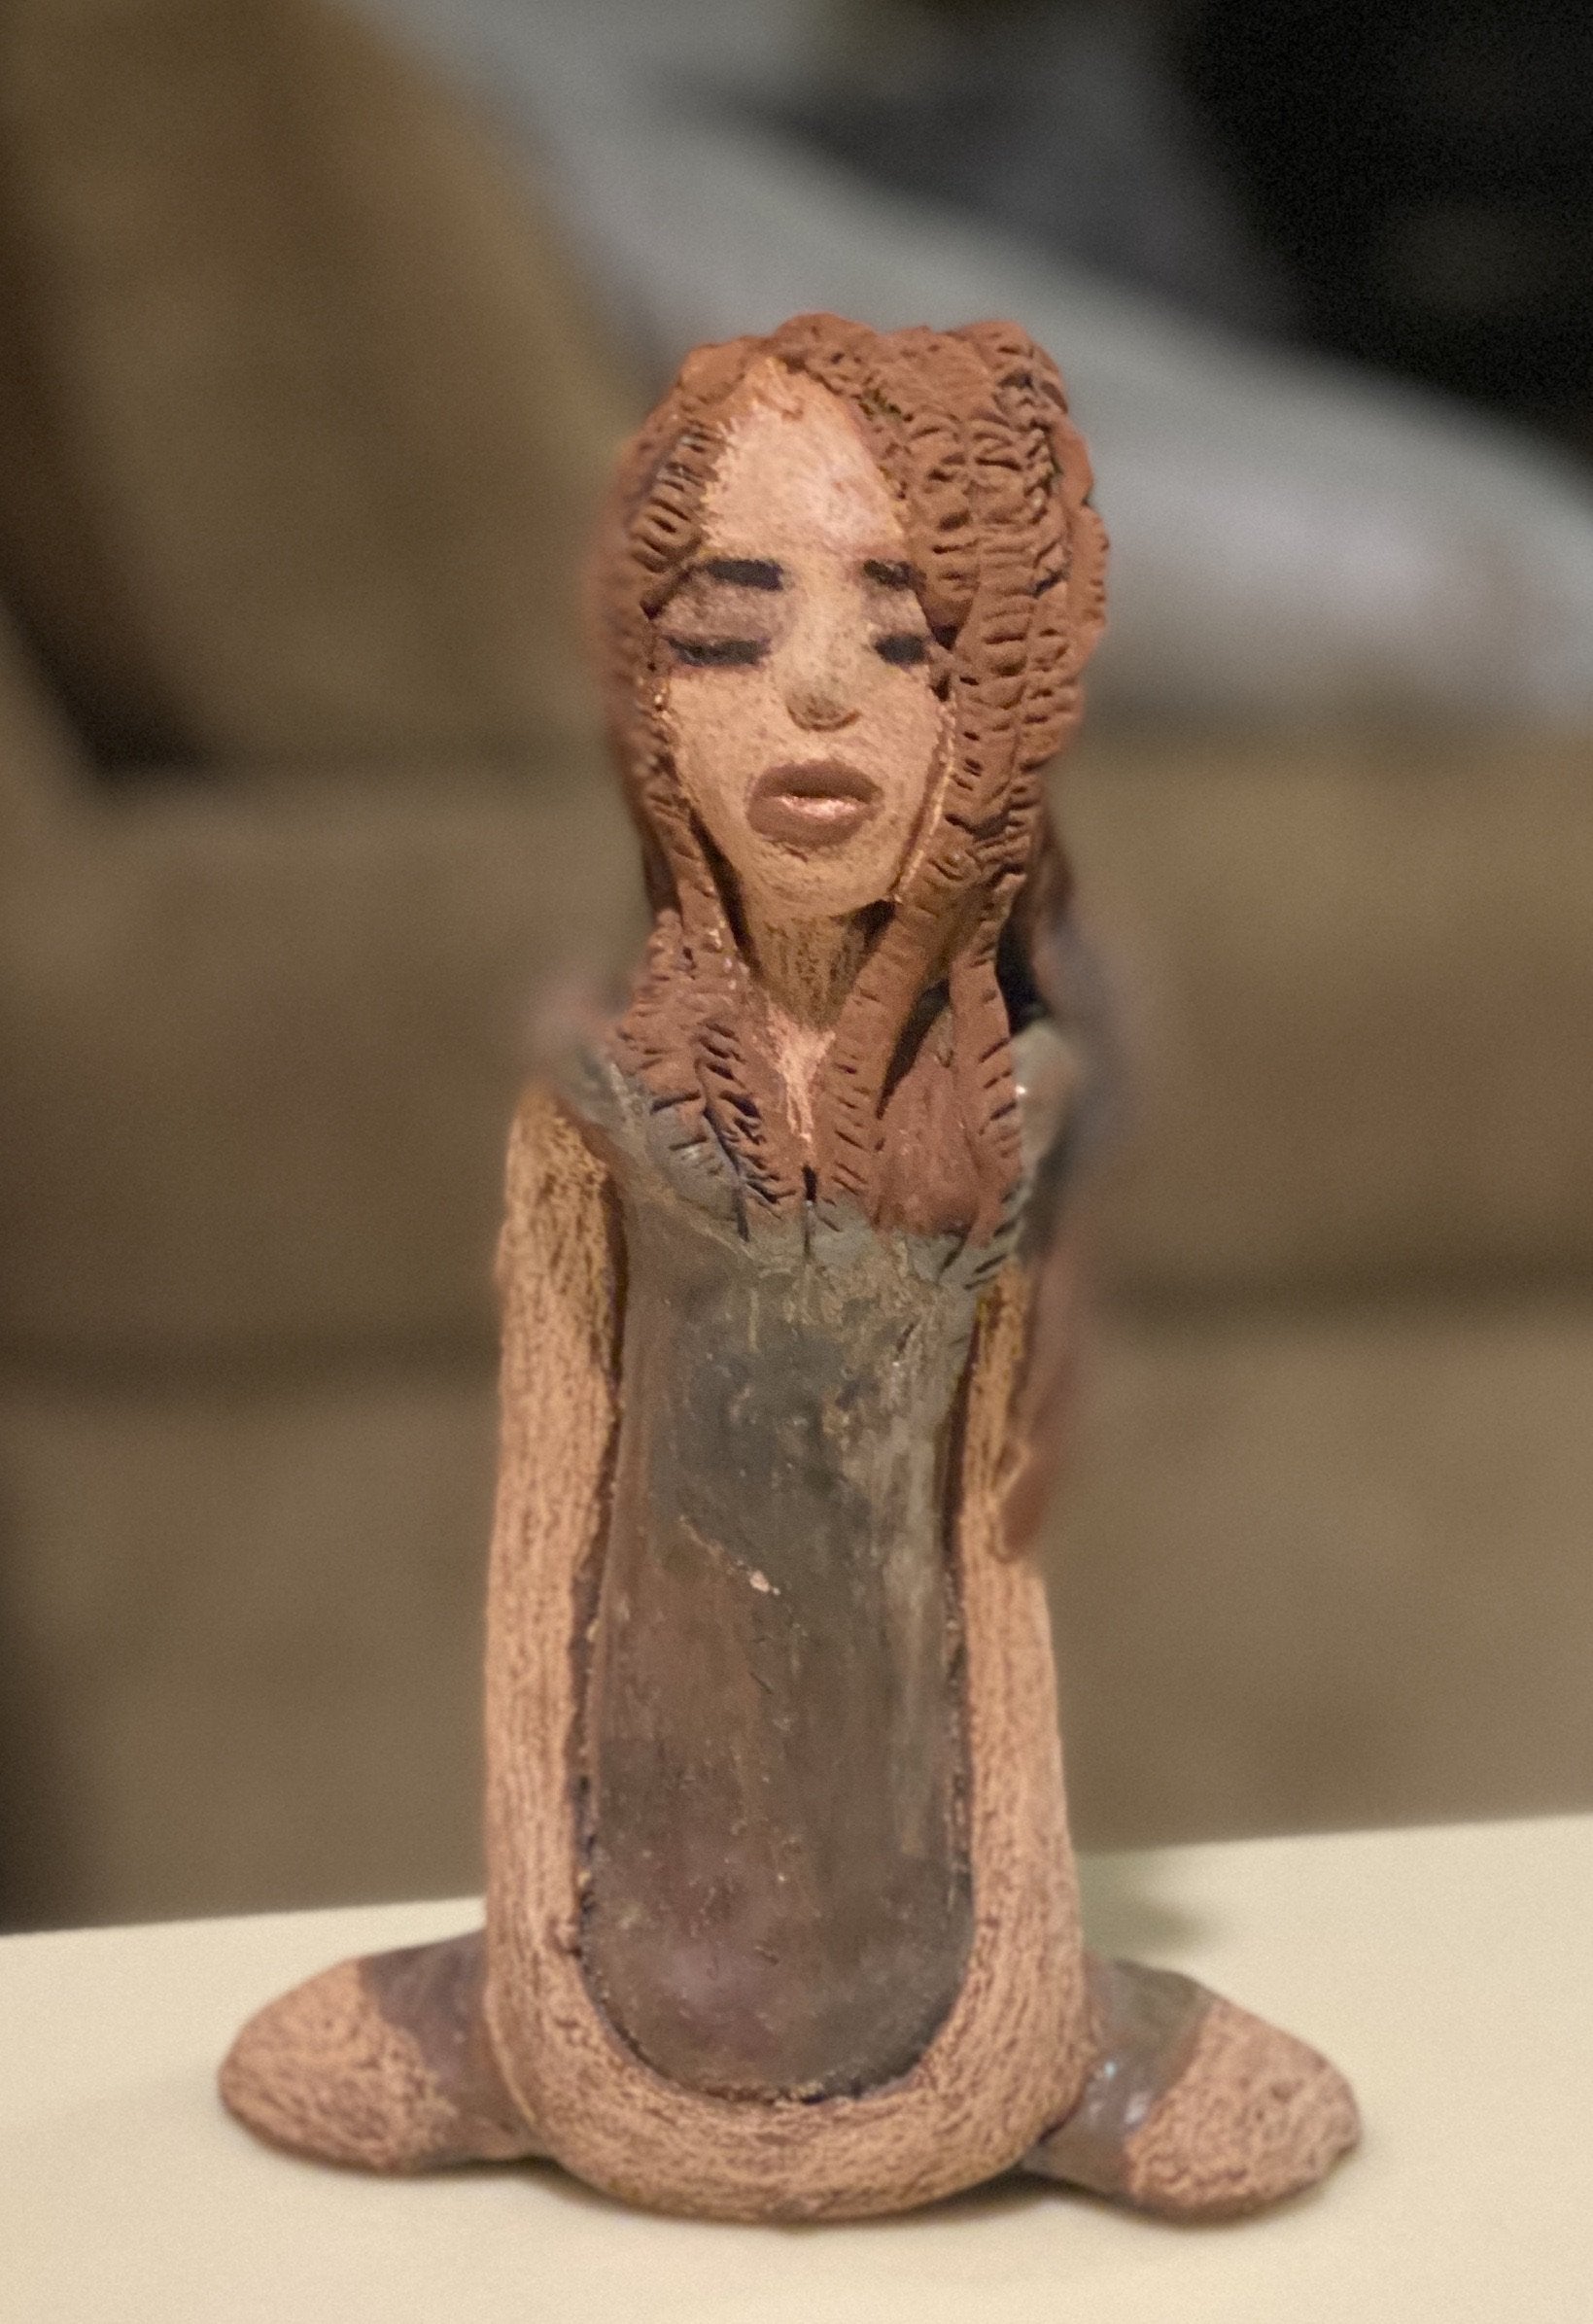 Amani stands 8" x 5" x 2.5" and weighs 1.03 lbs. She has a lovely beige brown complexion with long etched braided clay hair.   Amani long loving arms rest beside her copper green dress. Amani is a sophisticated lady that will grace your home.